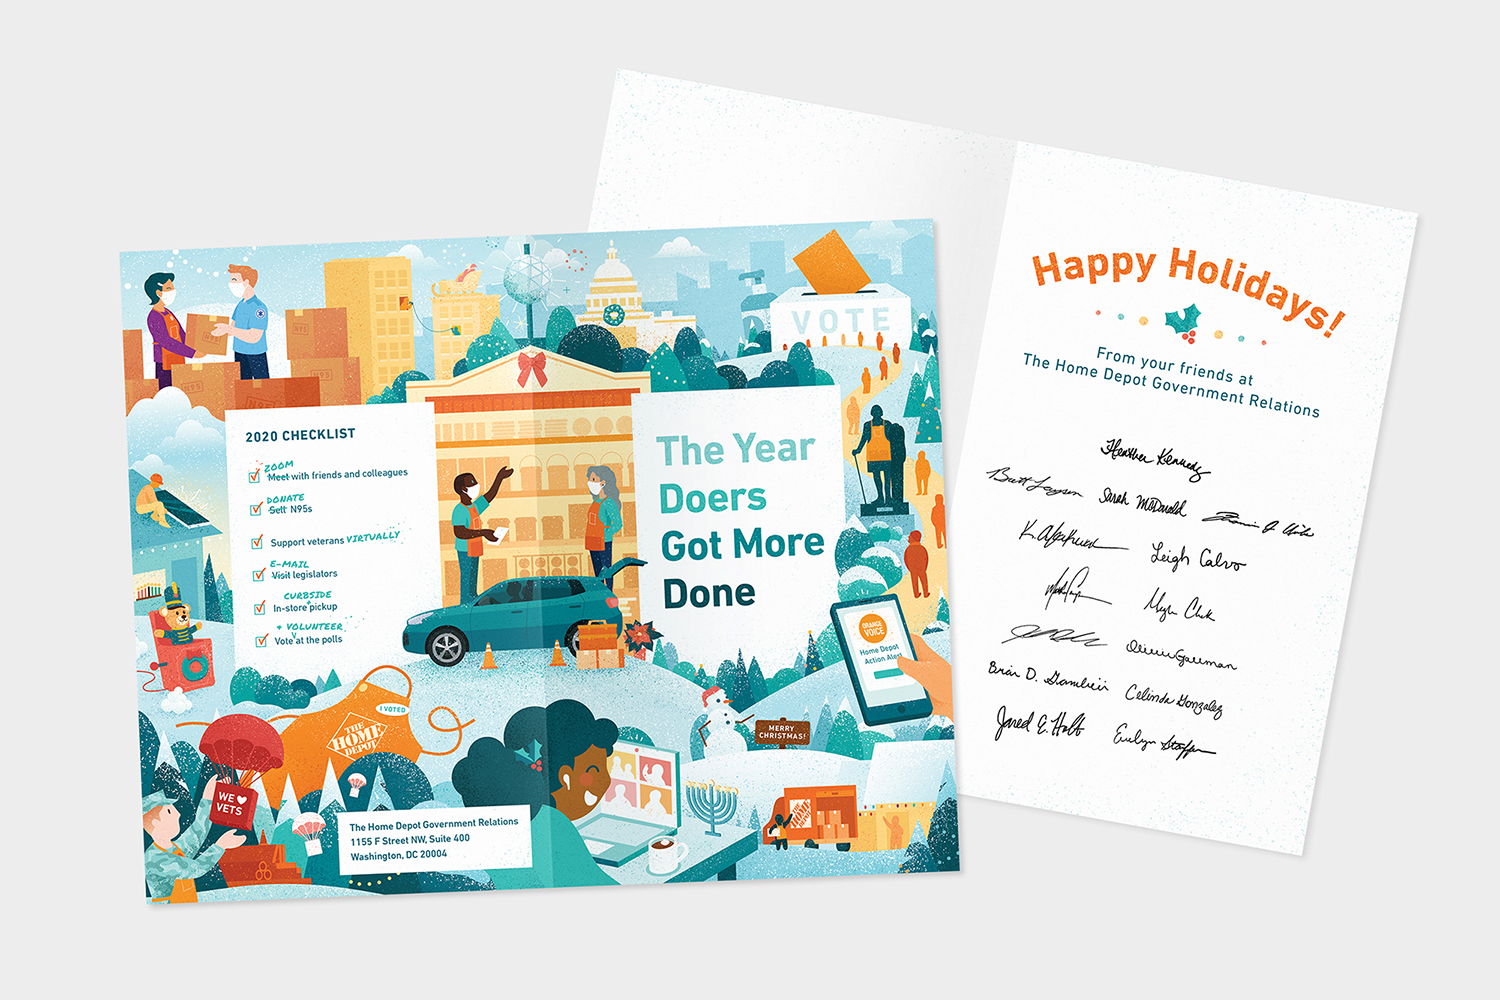 A holiday card from The Home Depot Government Relations. The card includes illustrated scenes of various activities and a checklist of 2023 accomplishments. The message "Happy Holidays!" is printed alongside signatures from the Government Relations team.